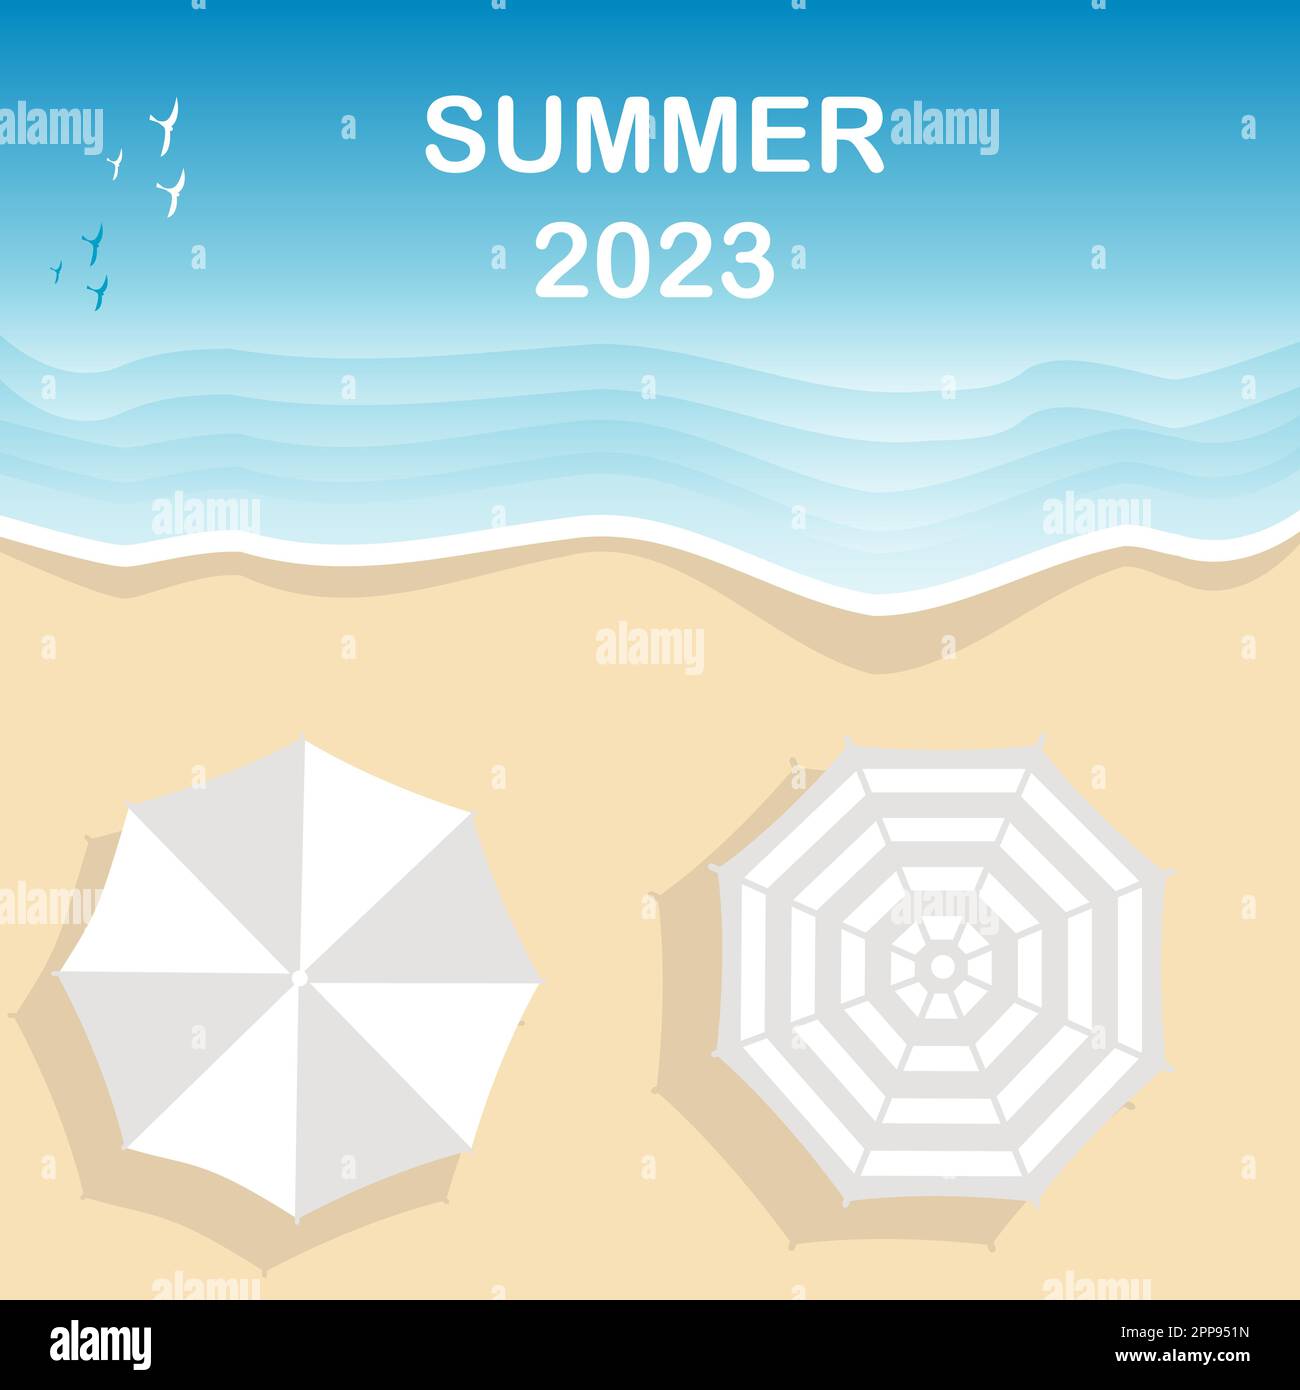 Summer of 2023 Stock Vector Images - Alamy